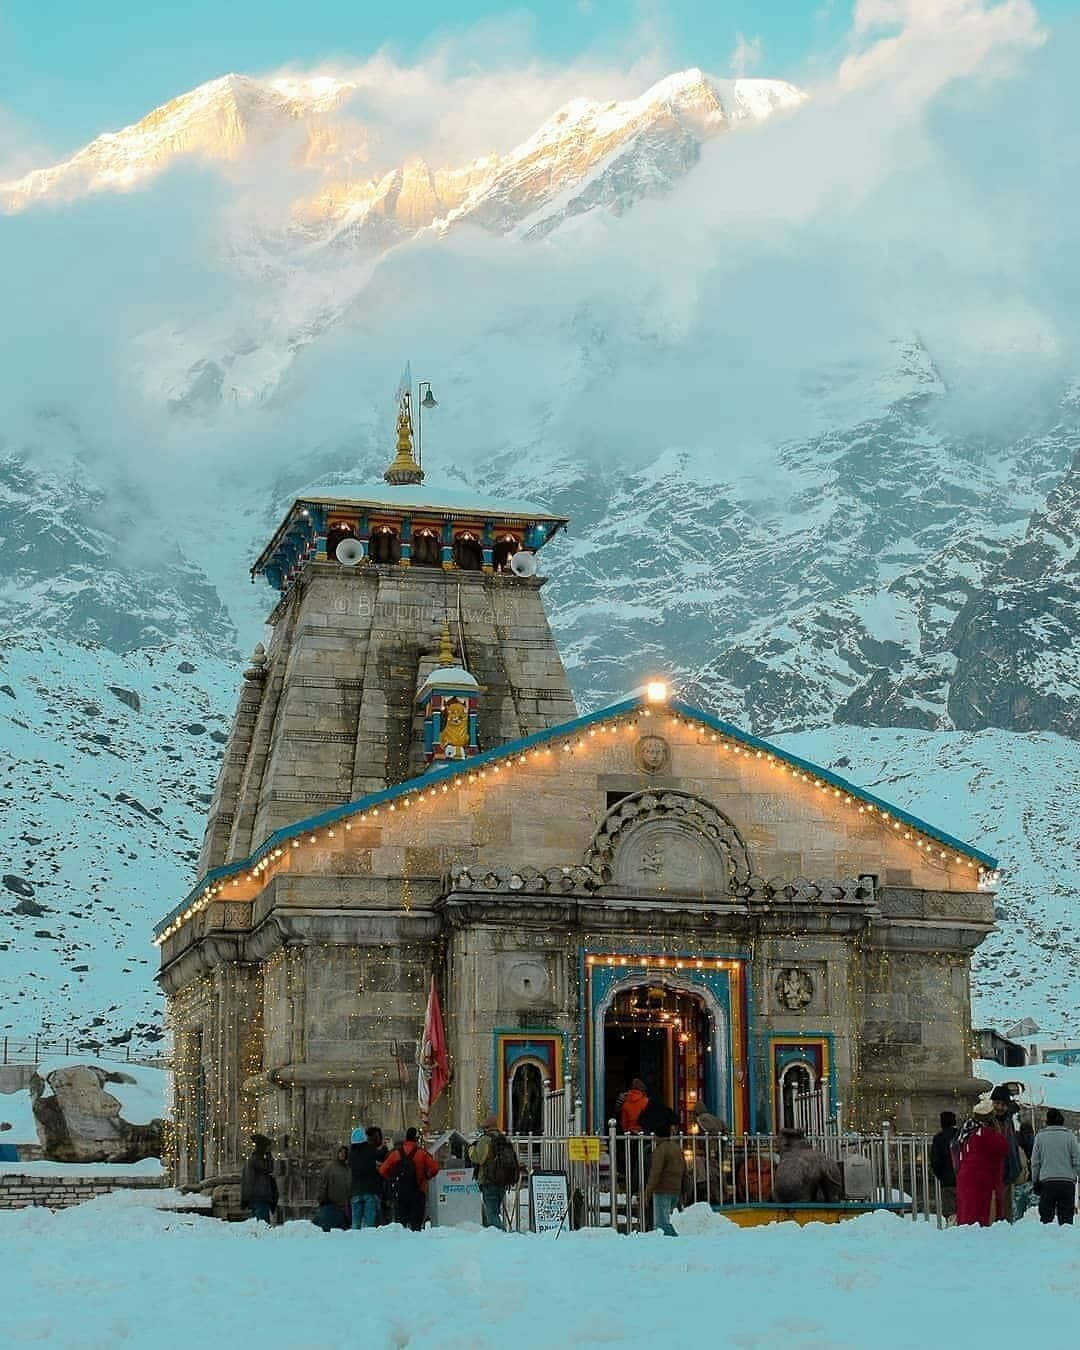 "Welcome to the peaceful and beautiful Himalayan village of Kedarnath."